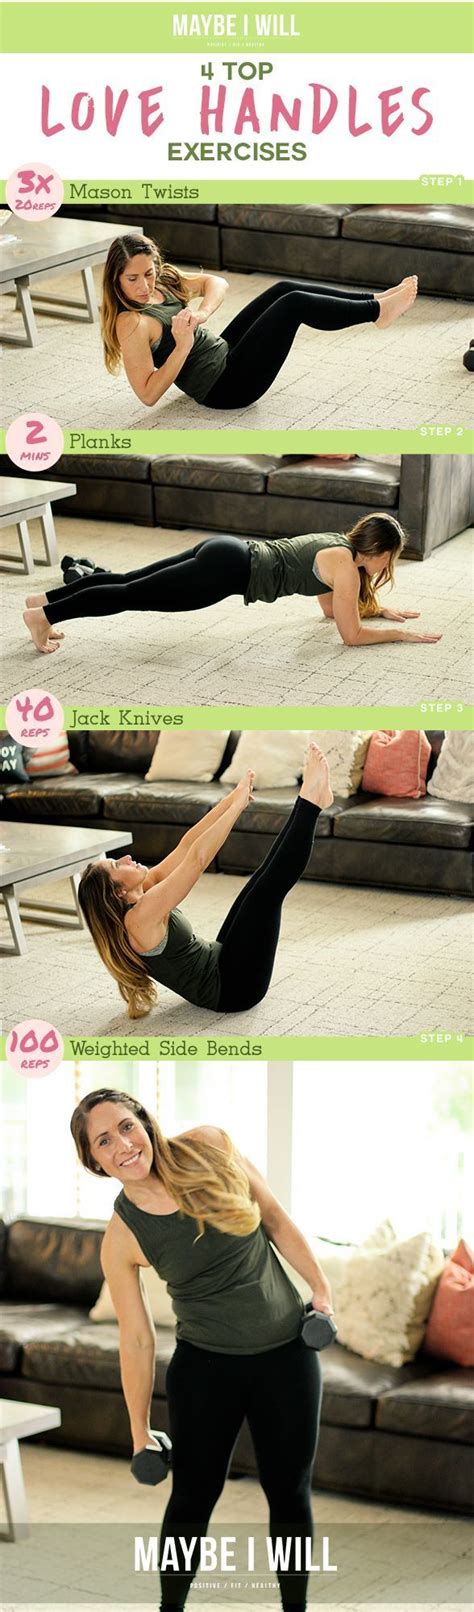 these 4 top love handle exercises will help to tone and tighten your middle area and give you a